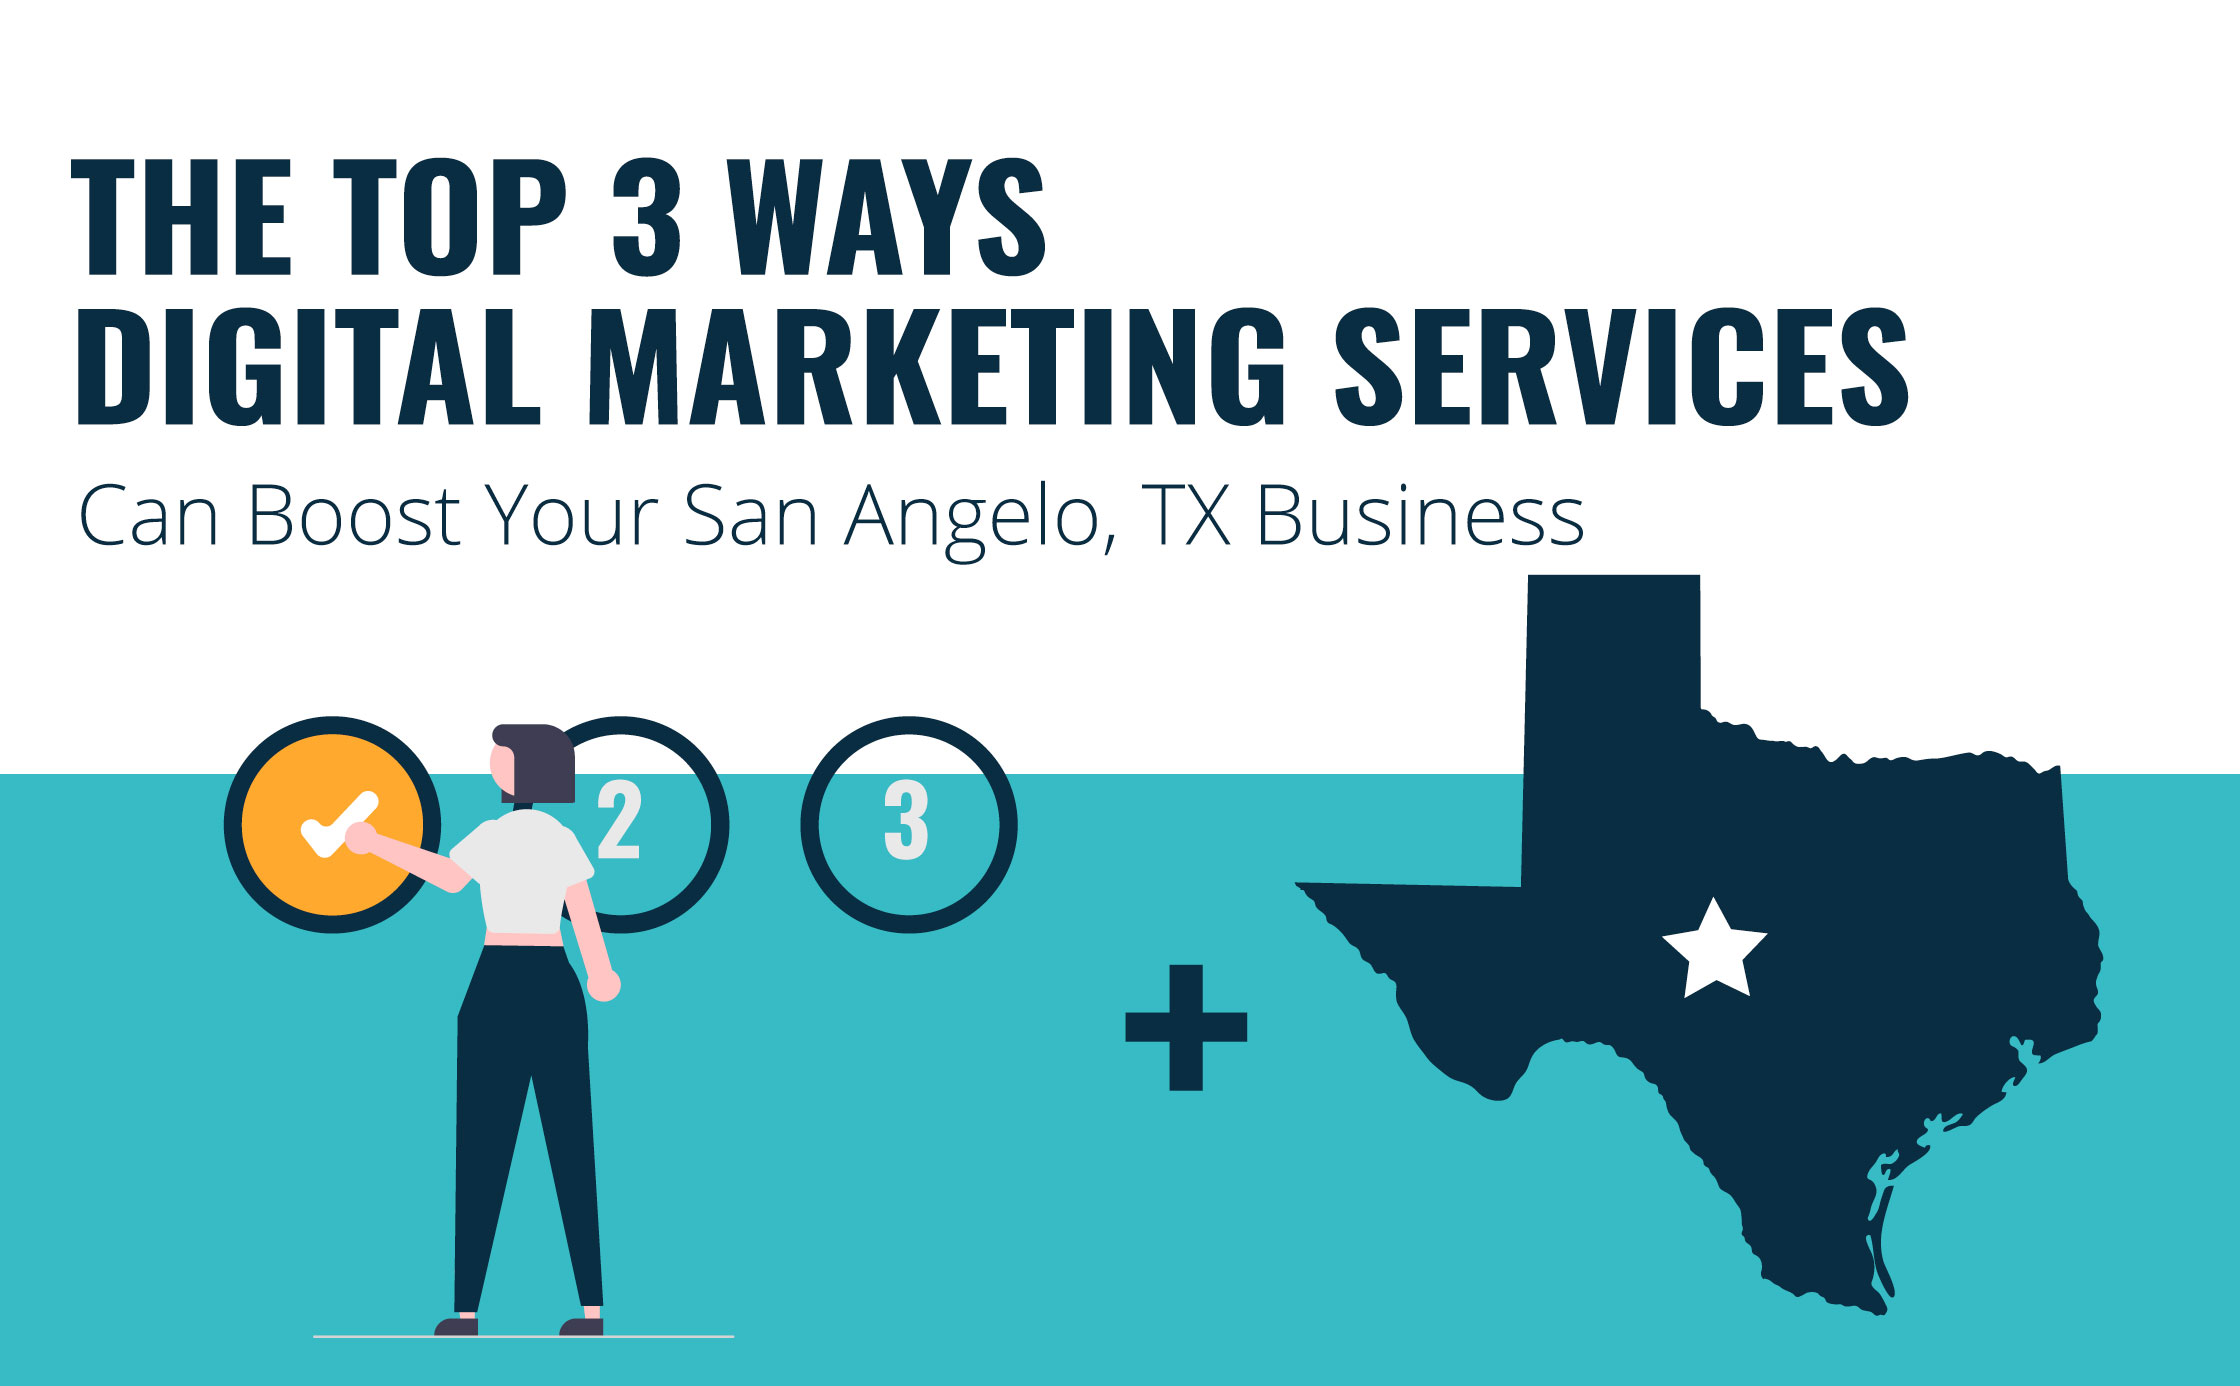 The Top 3 Ways Digital Marketing Services Can Boost Your San Angelo, TX Business